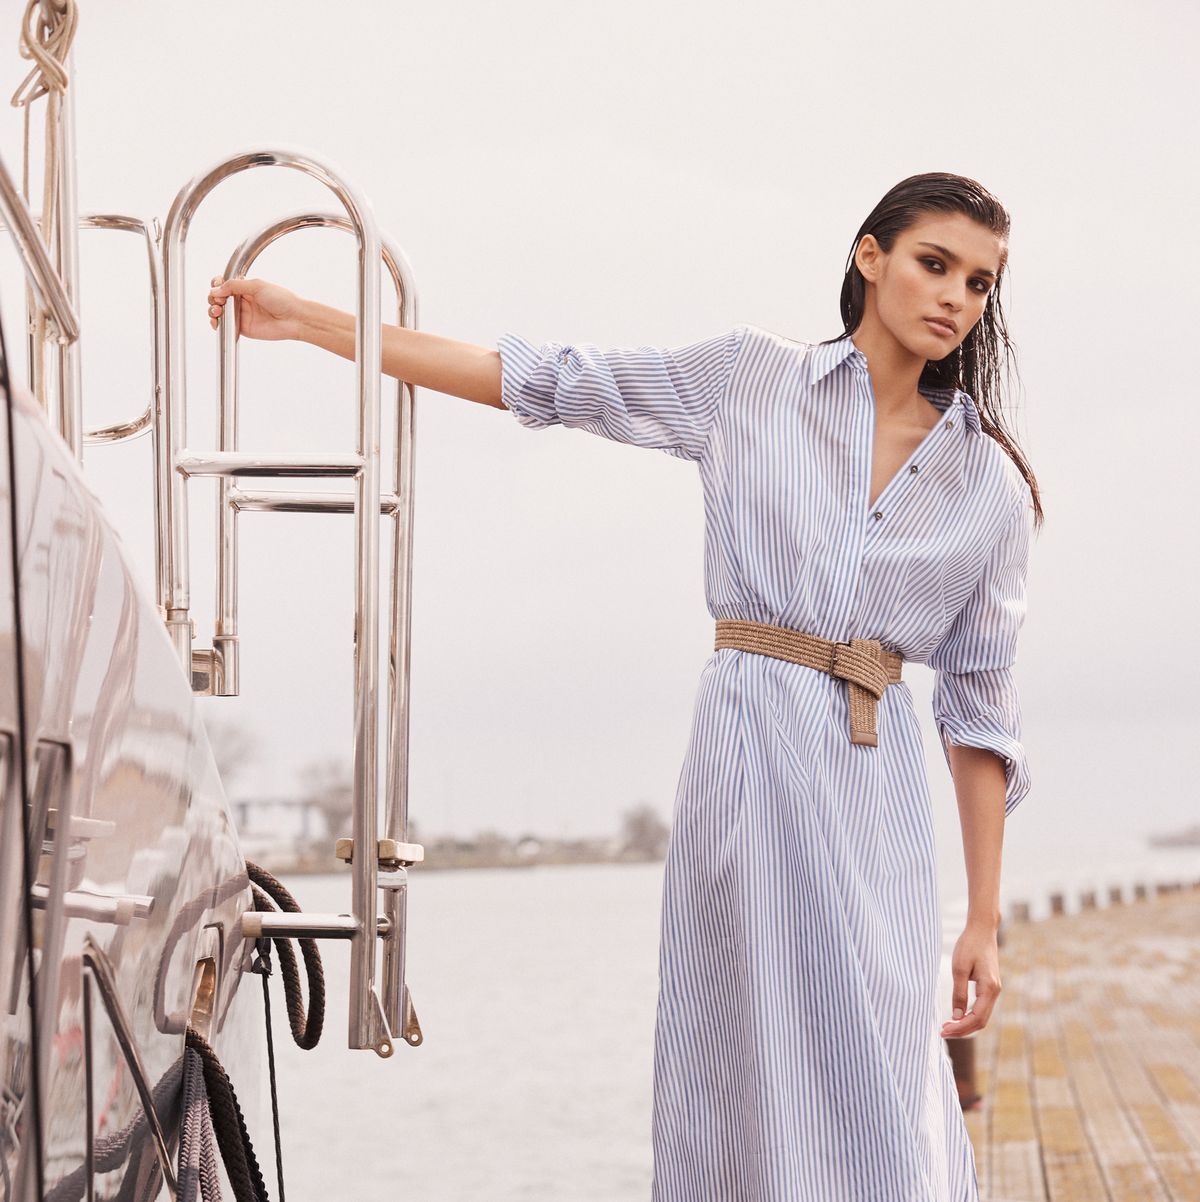 Saks Just Launched an Exclusive Brunello Cucinelli Women's Sailing Capsule